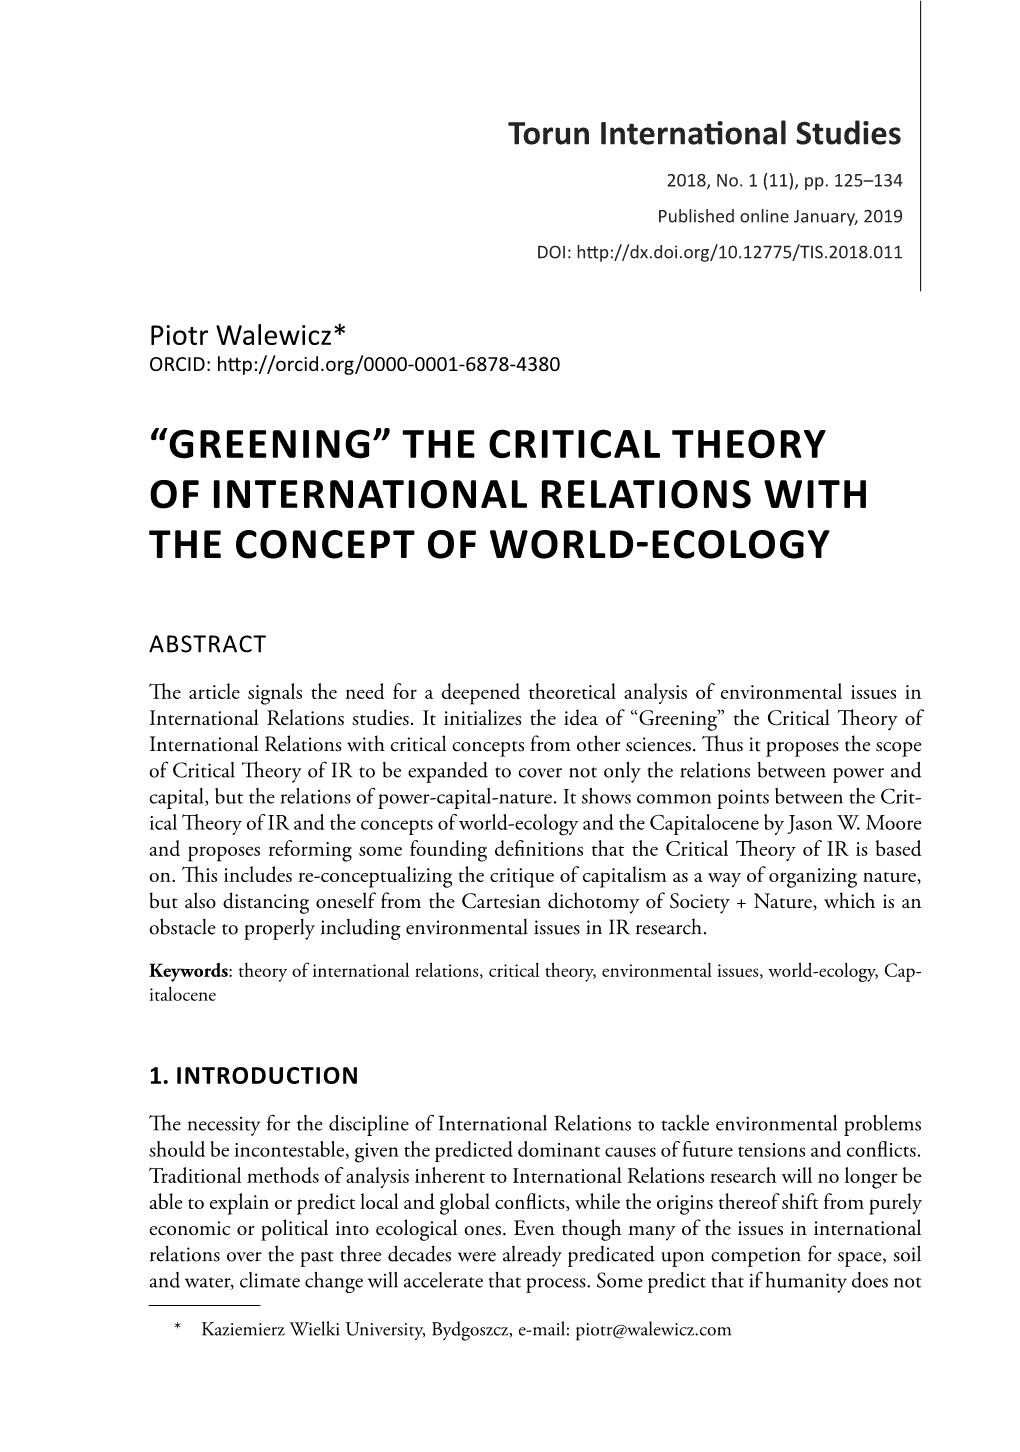 The Critical Theory of International Relations with the Concept of World�Ecology